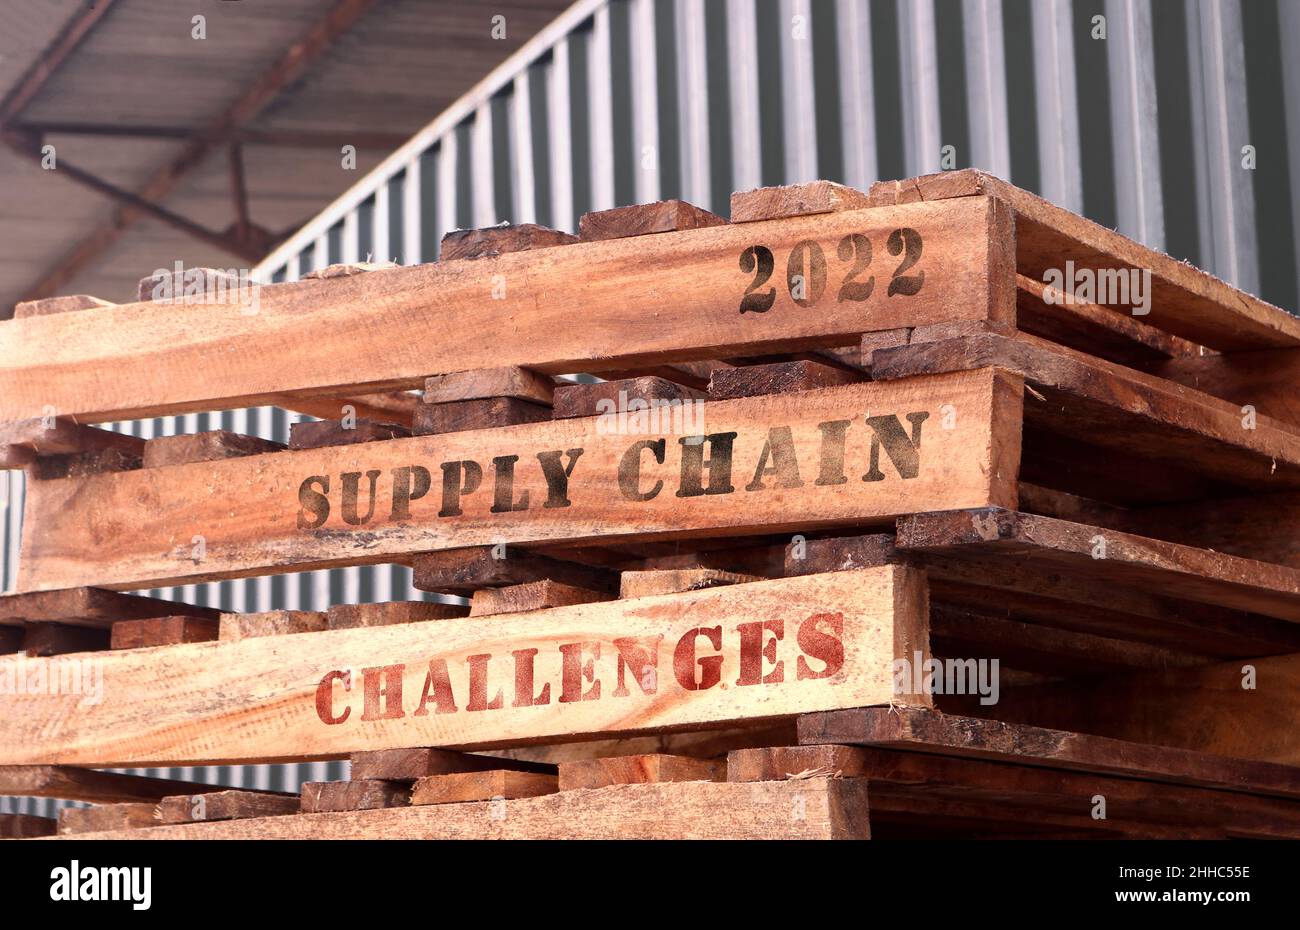 2022 Supply Chain Challenges, text written on piled up pallets. Supply chain and logistics concept. Stock Photo